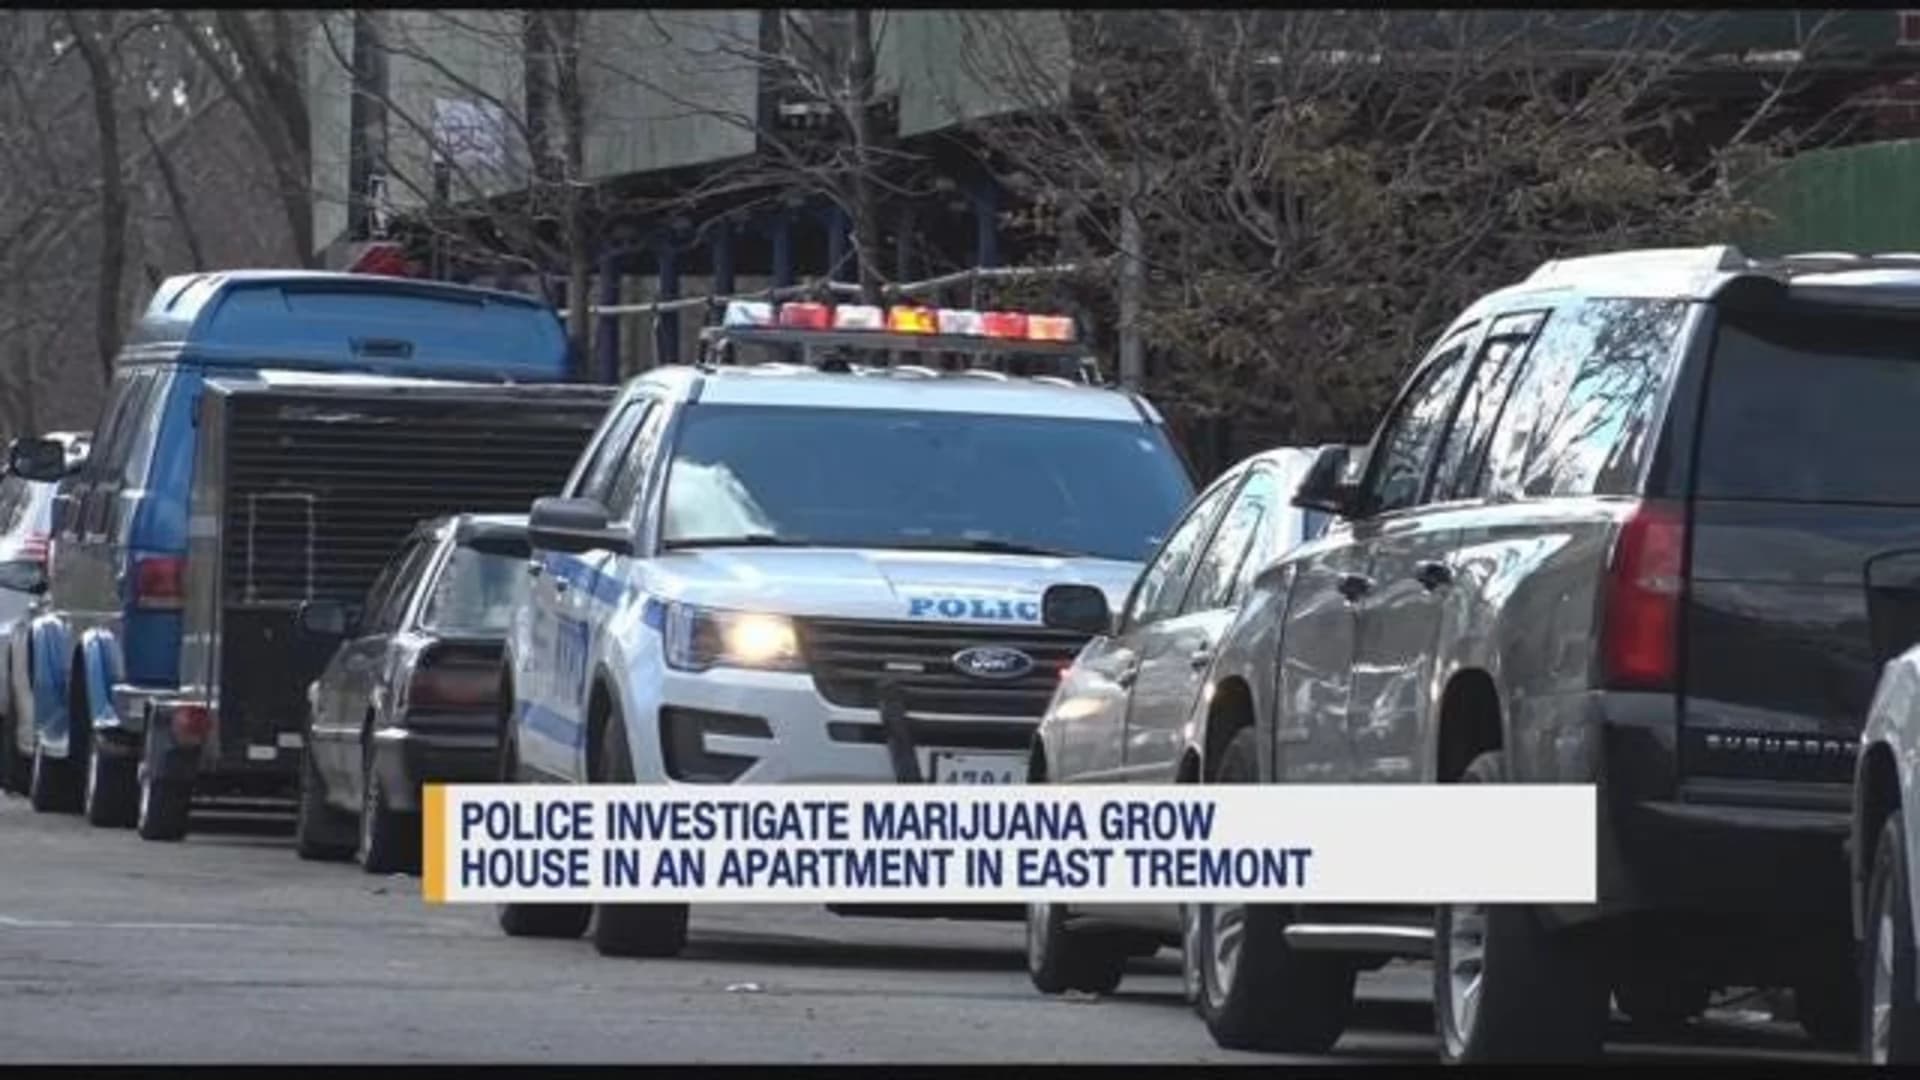 Police: Marijuana grow house uncovered in East Tremont